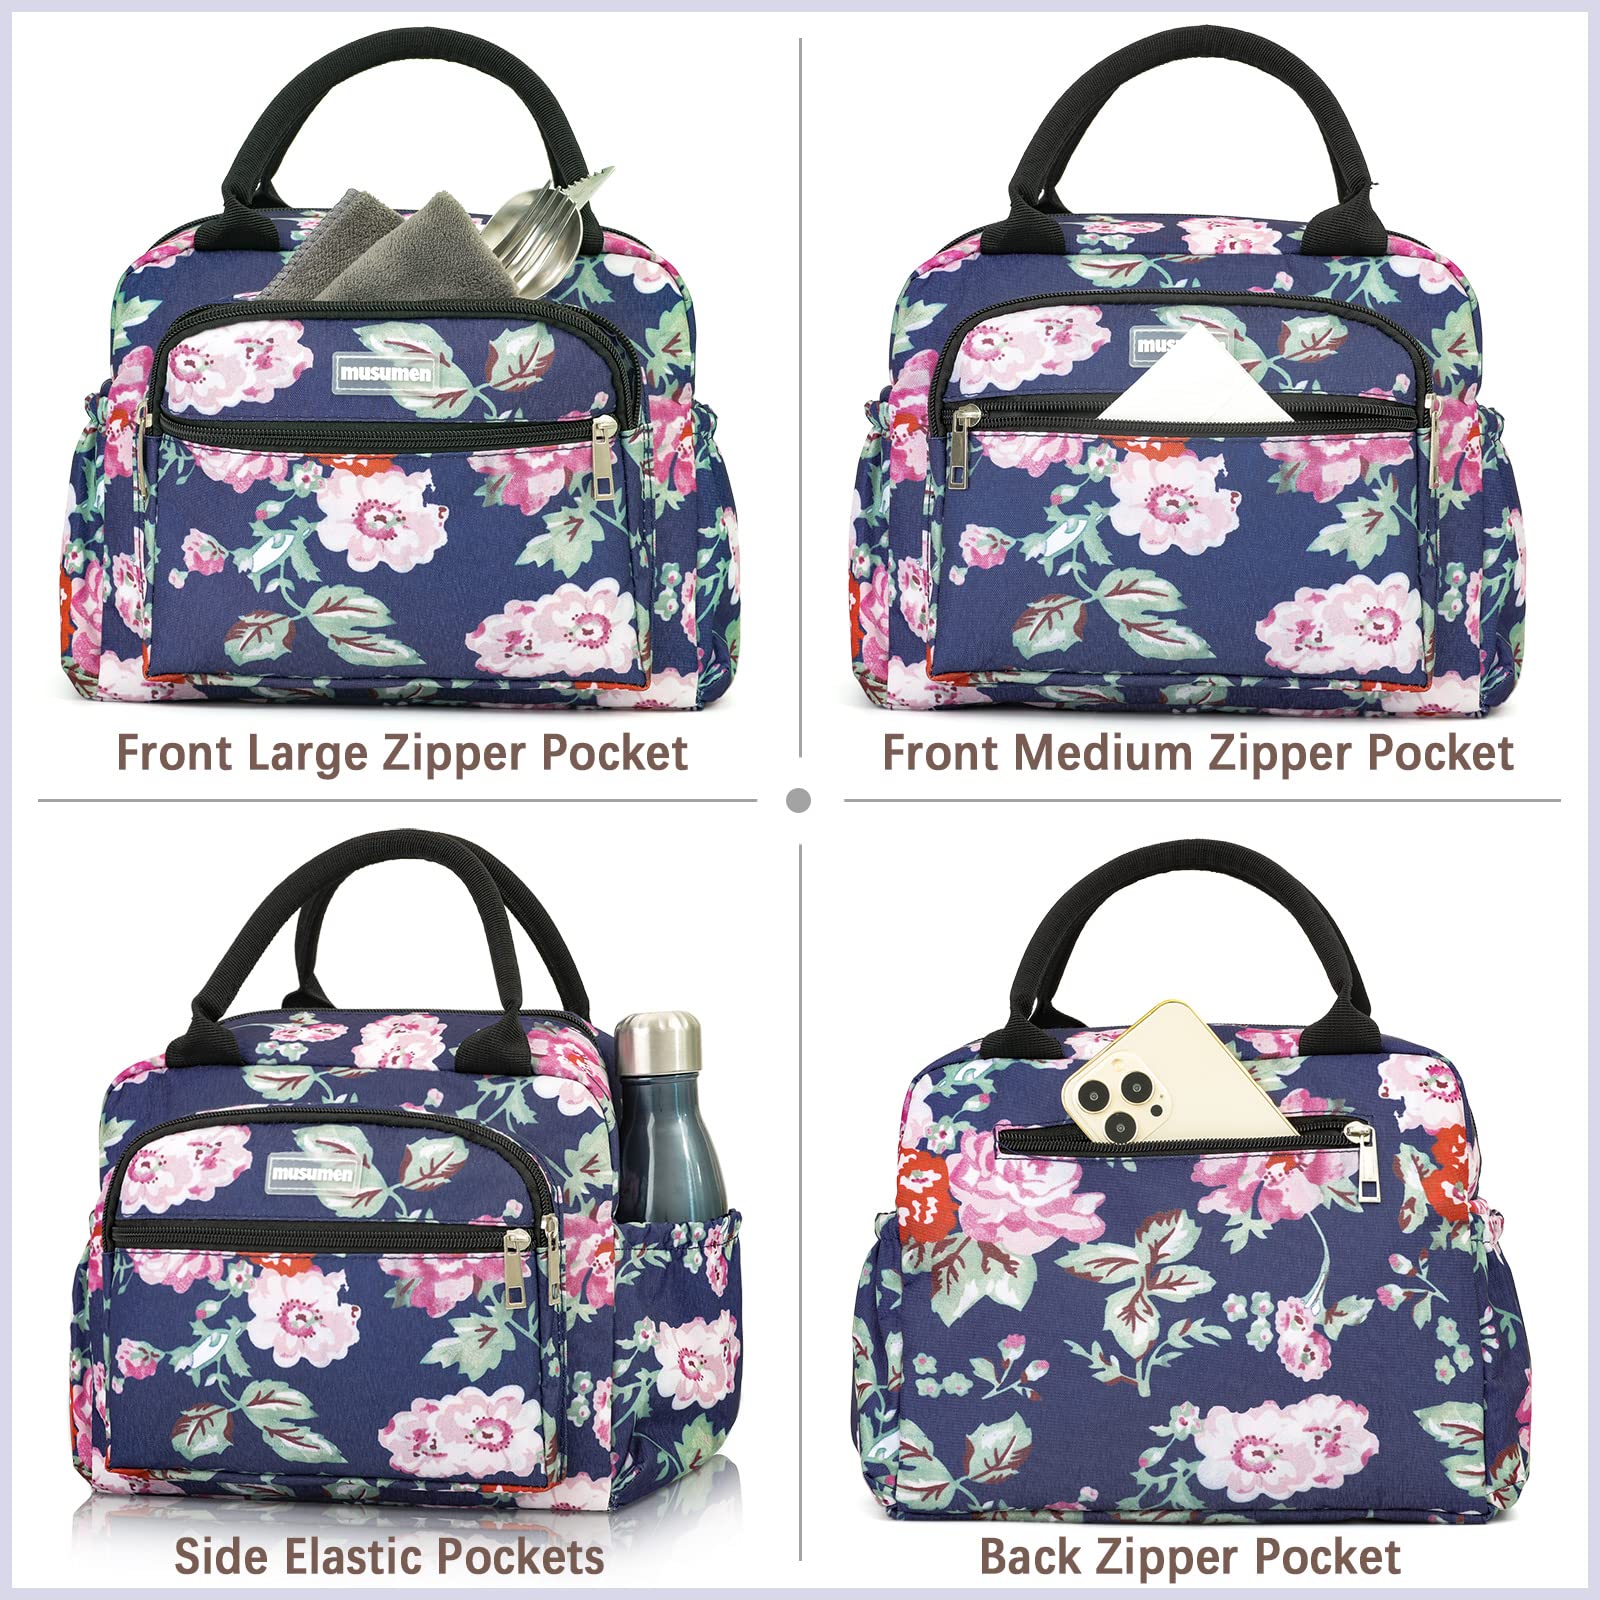 musumen Triple Insulated Lunch Bag for Women - 300D Oxford Fabric, Leak-Proof, Waterproof, and Spacious with Multiple Pockets